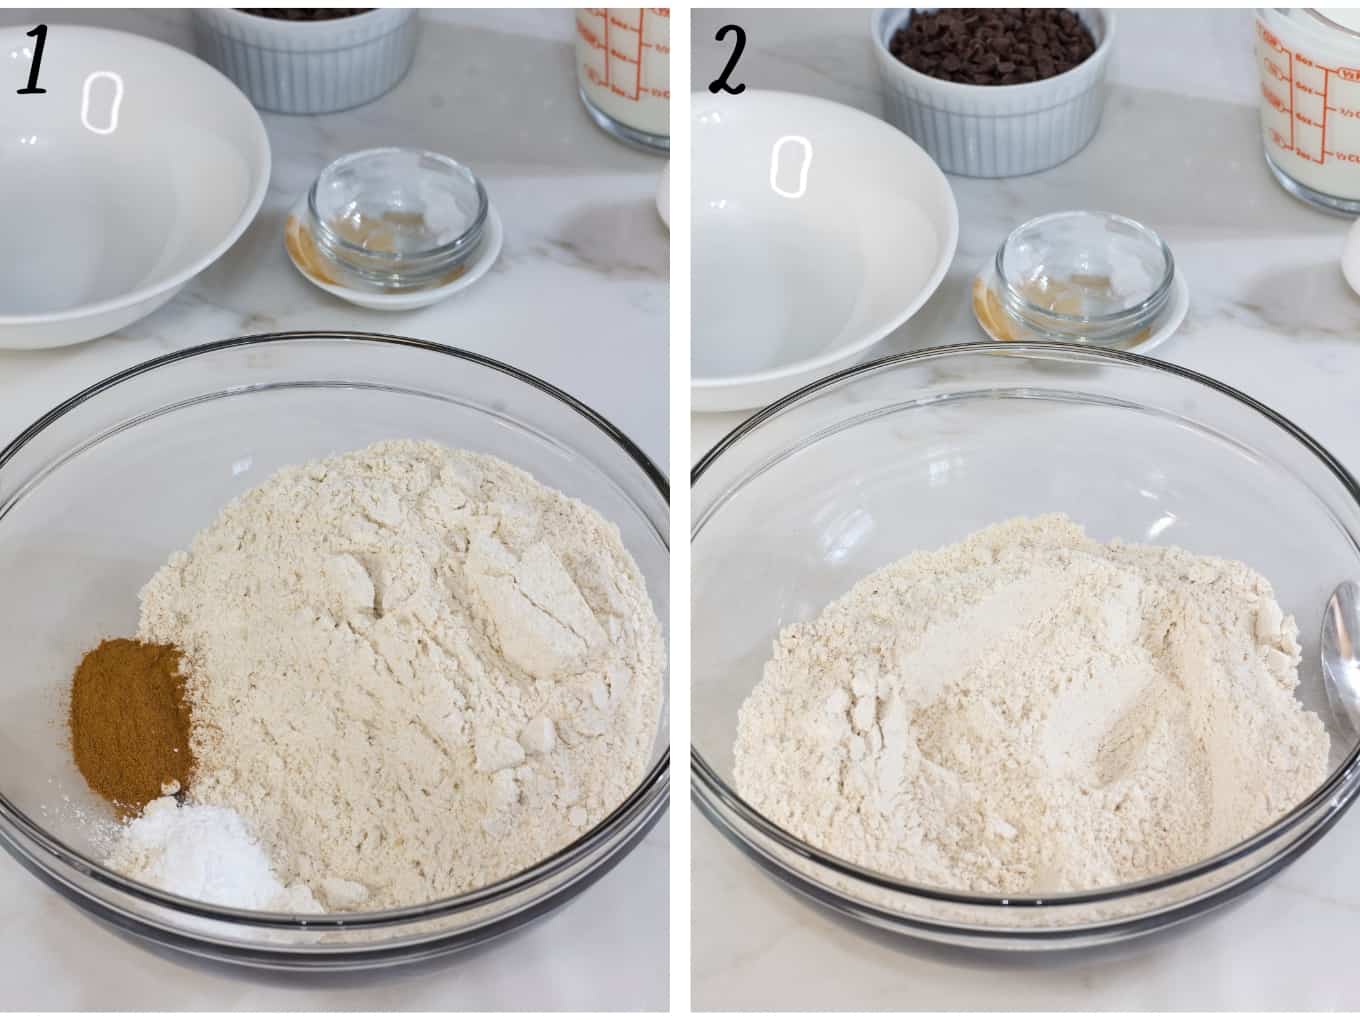 Side by side images of the dry ingredients in a glass bowl, the left image not mixed and the right image mixed.